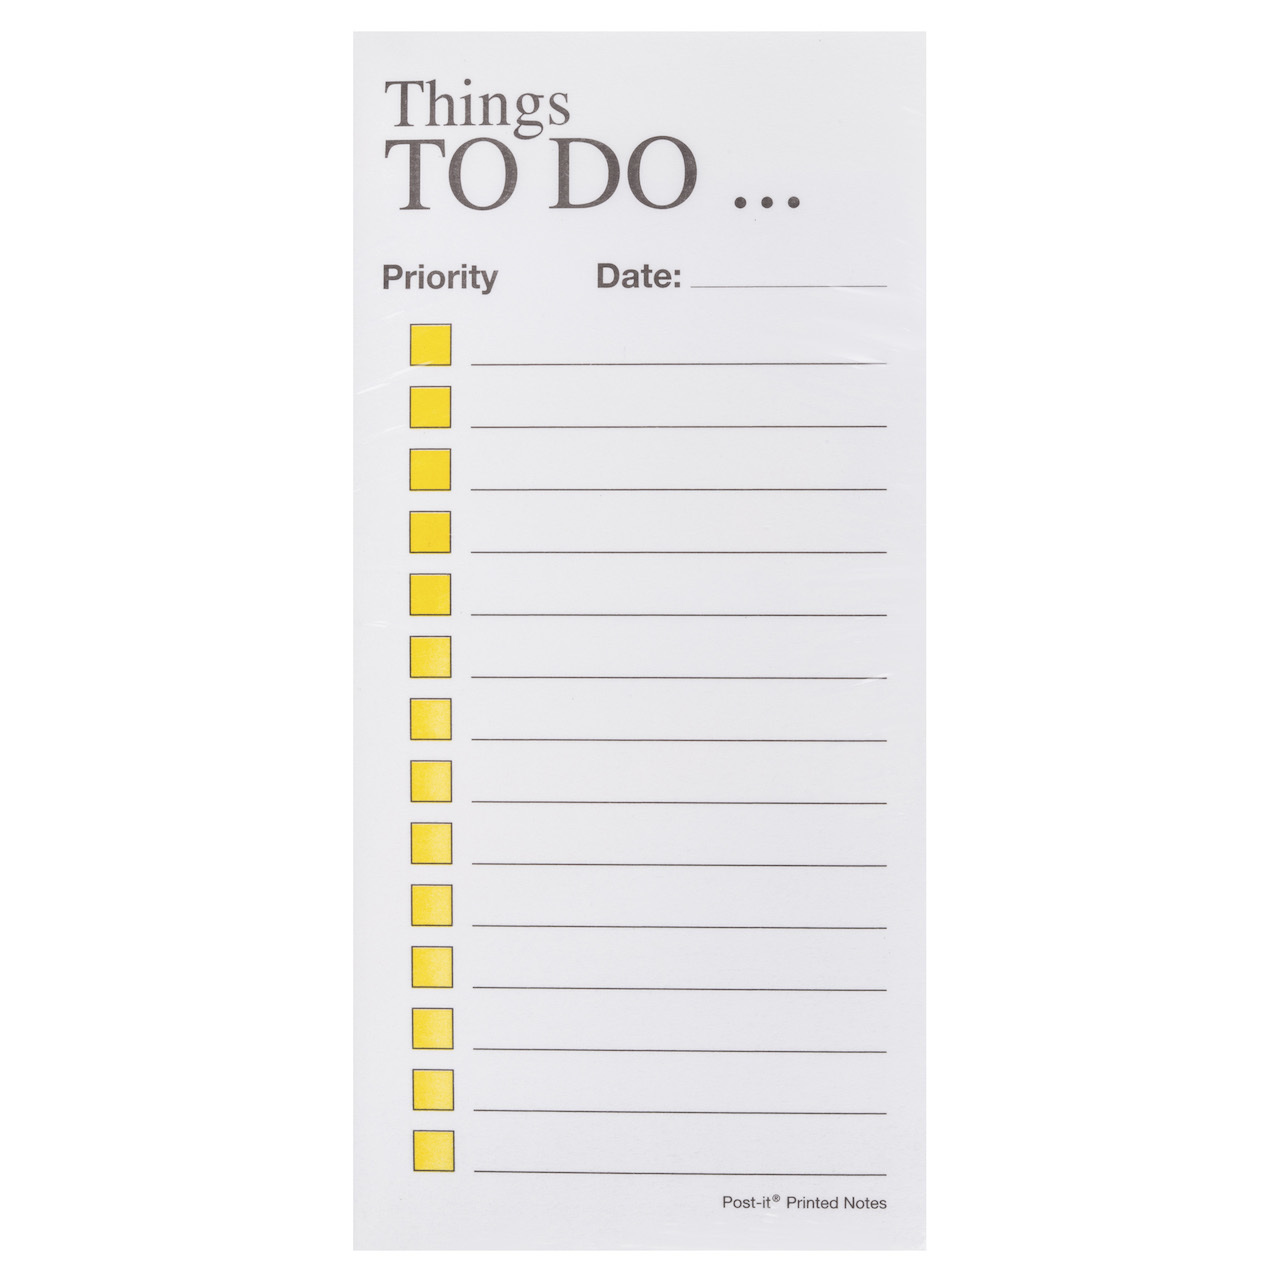 10405250 PT06 POST-IT PAD Things To Do 3m 0372714 Post-it?